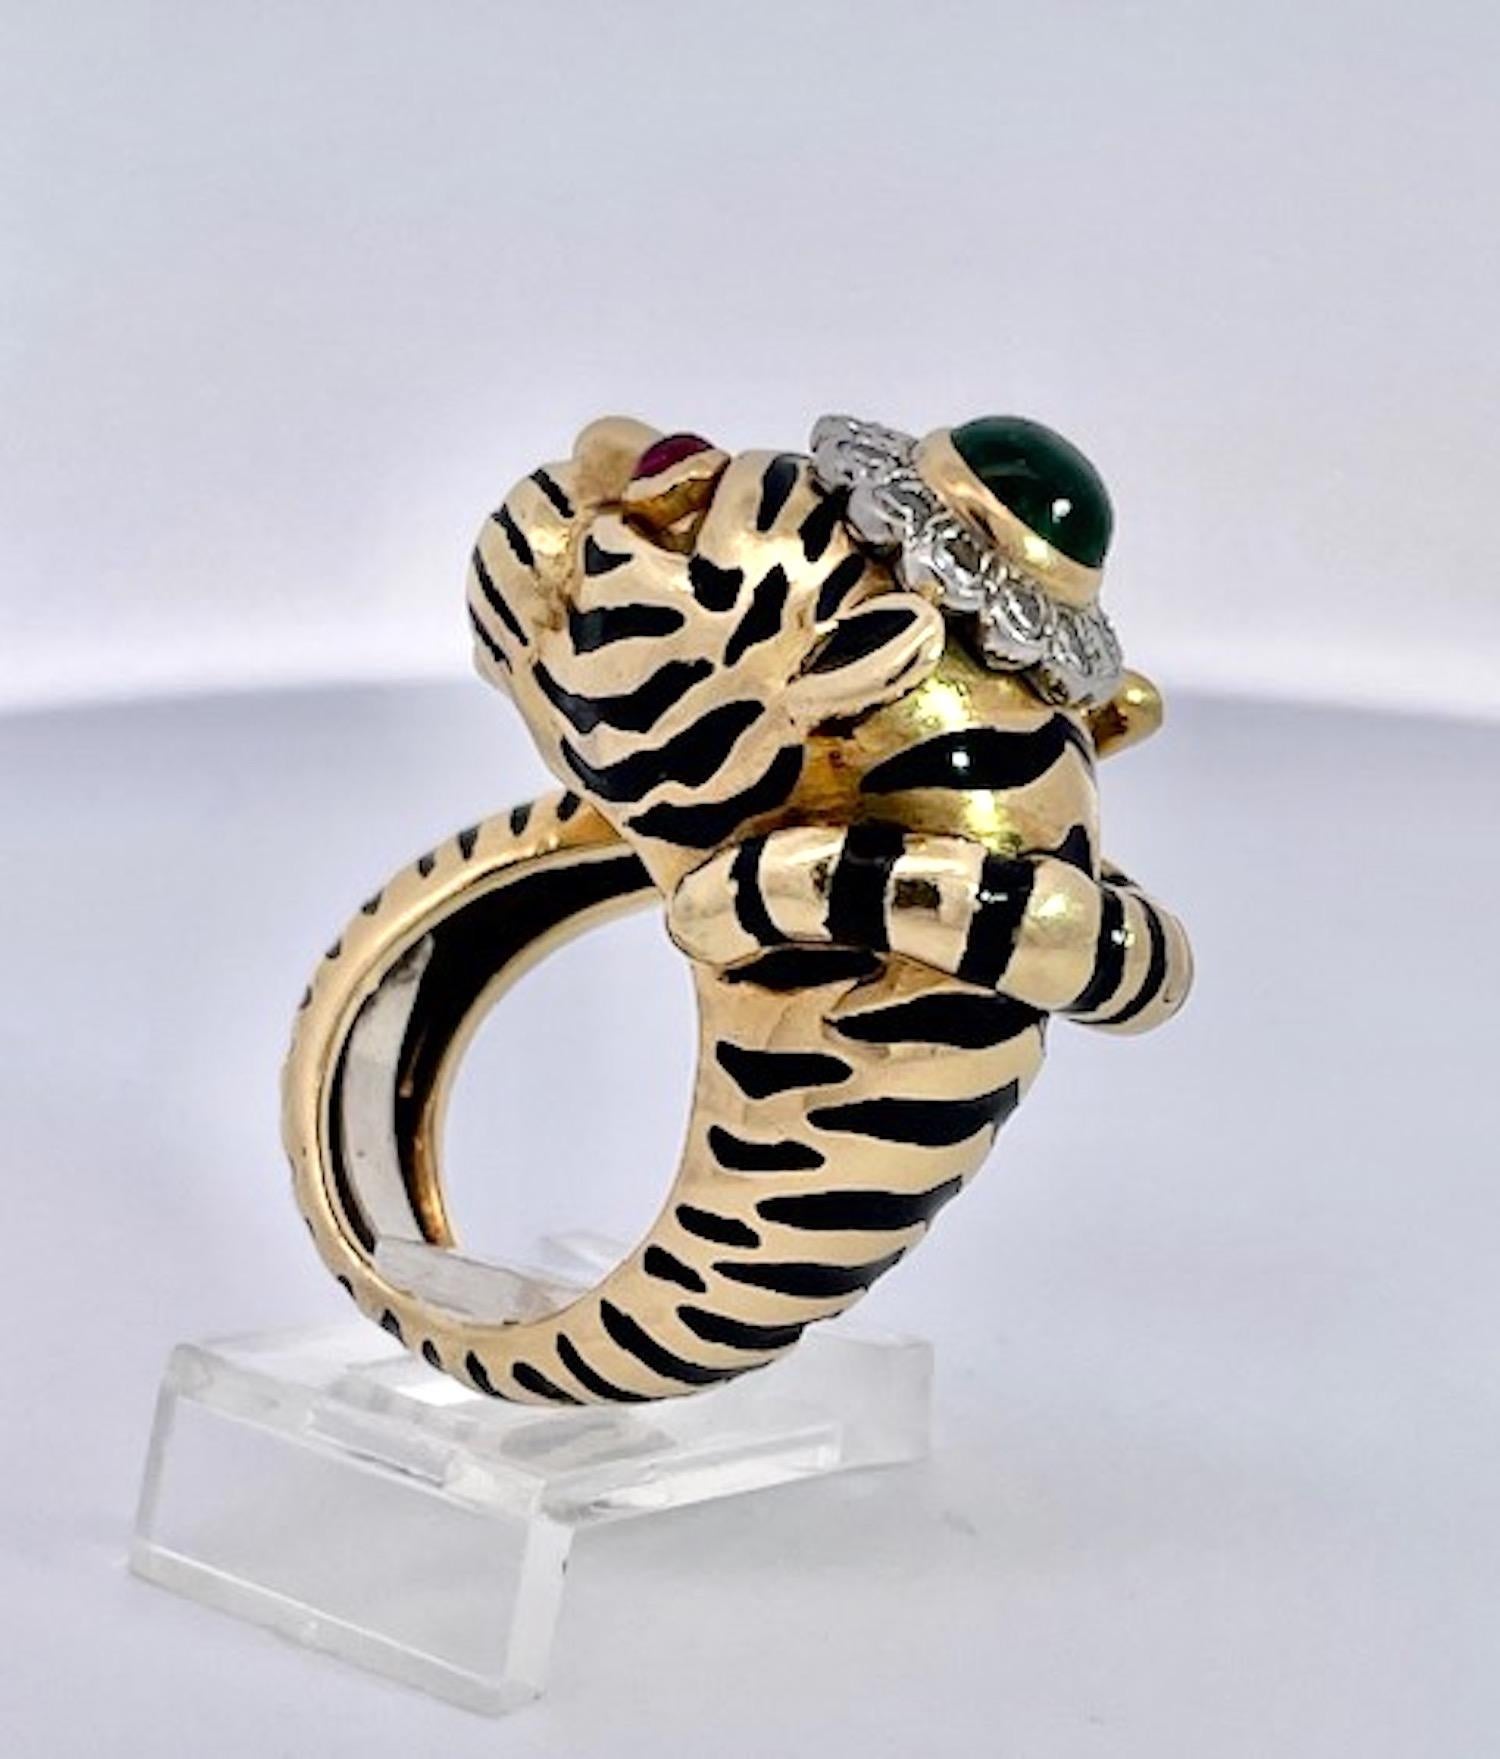 This amazing David Webb Tiger ring has all the bells and whistles.  It is gently used and in great shape.  This ring boosts Ruby eyes and an Emerald Crown on his head.  The Rubies and Emerald are Cabochon cut and the stripes are in really good